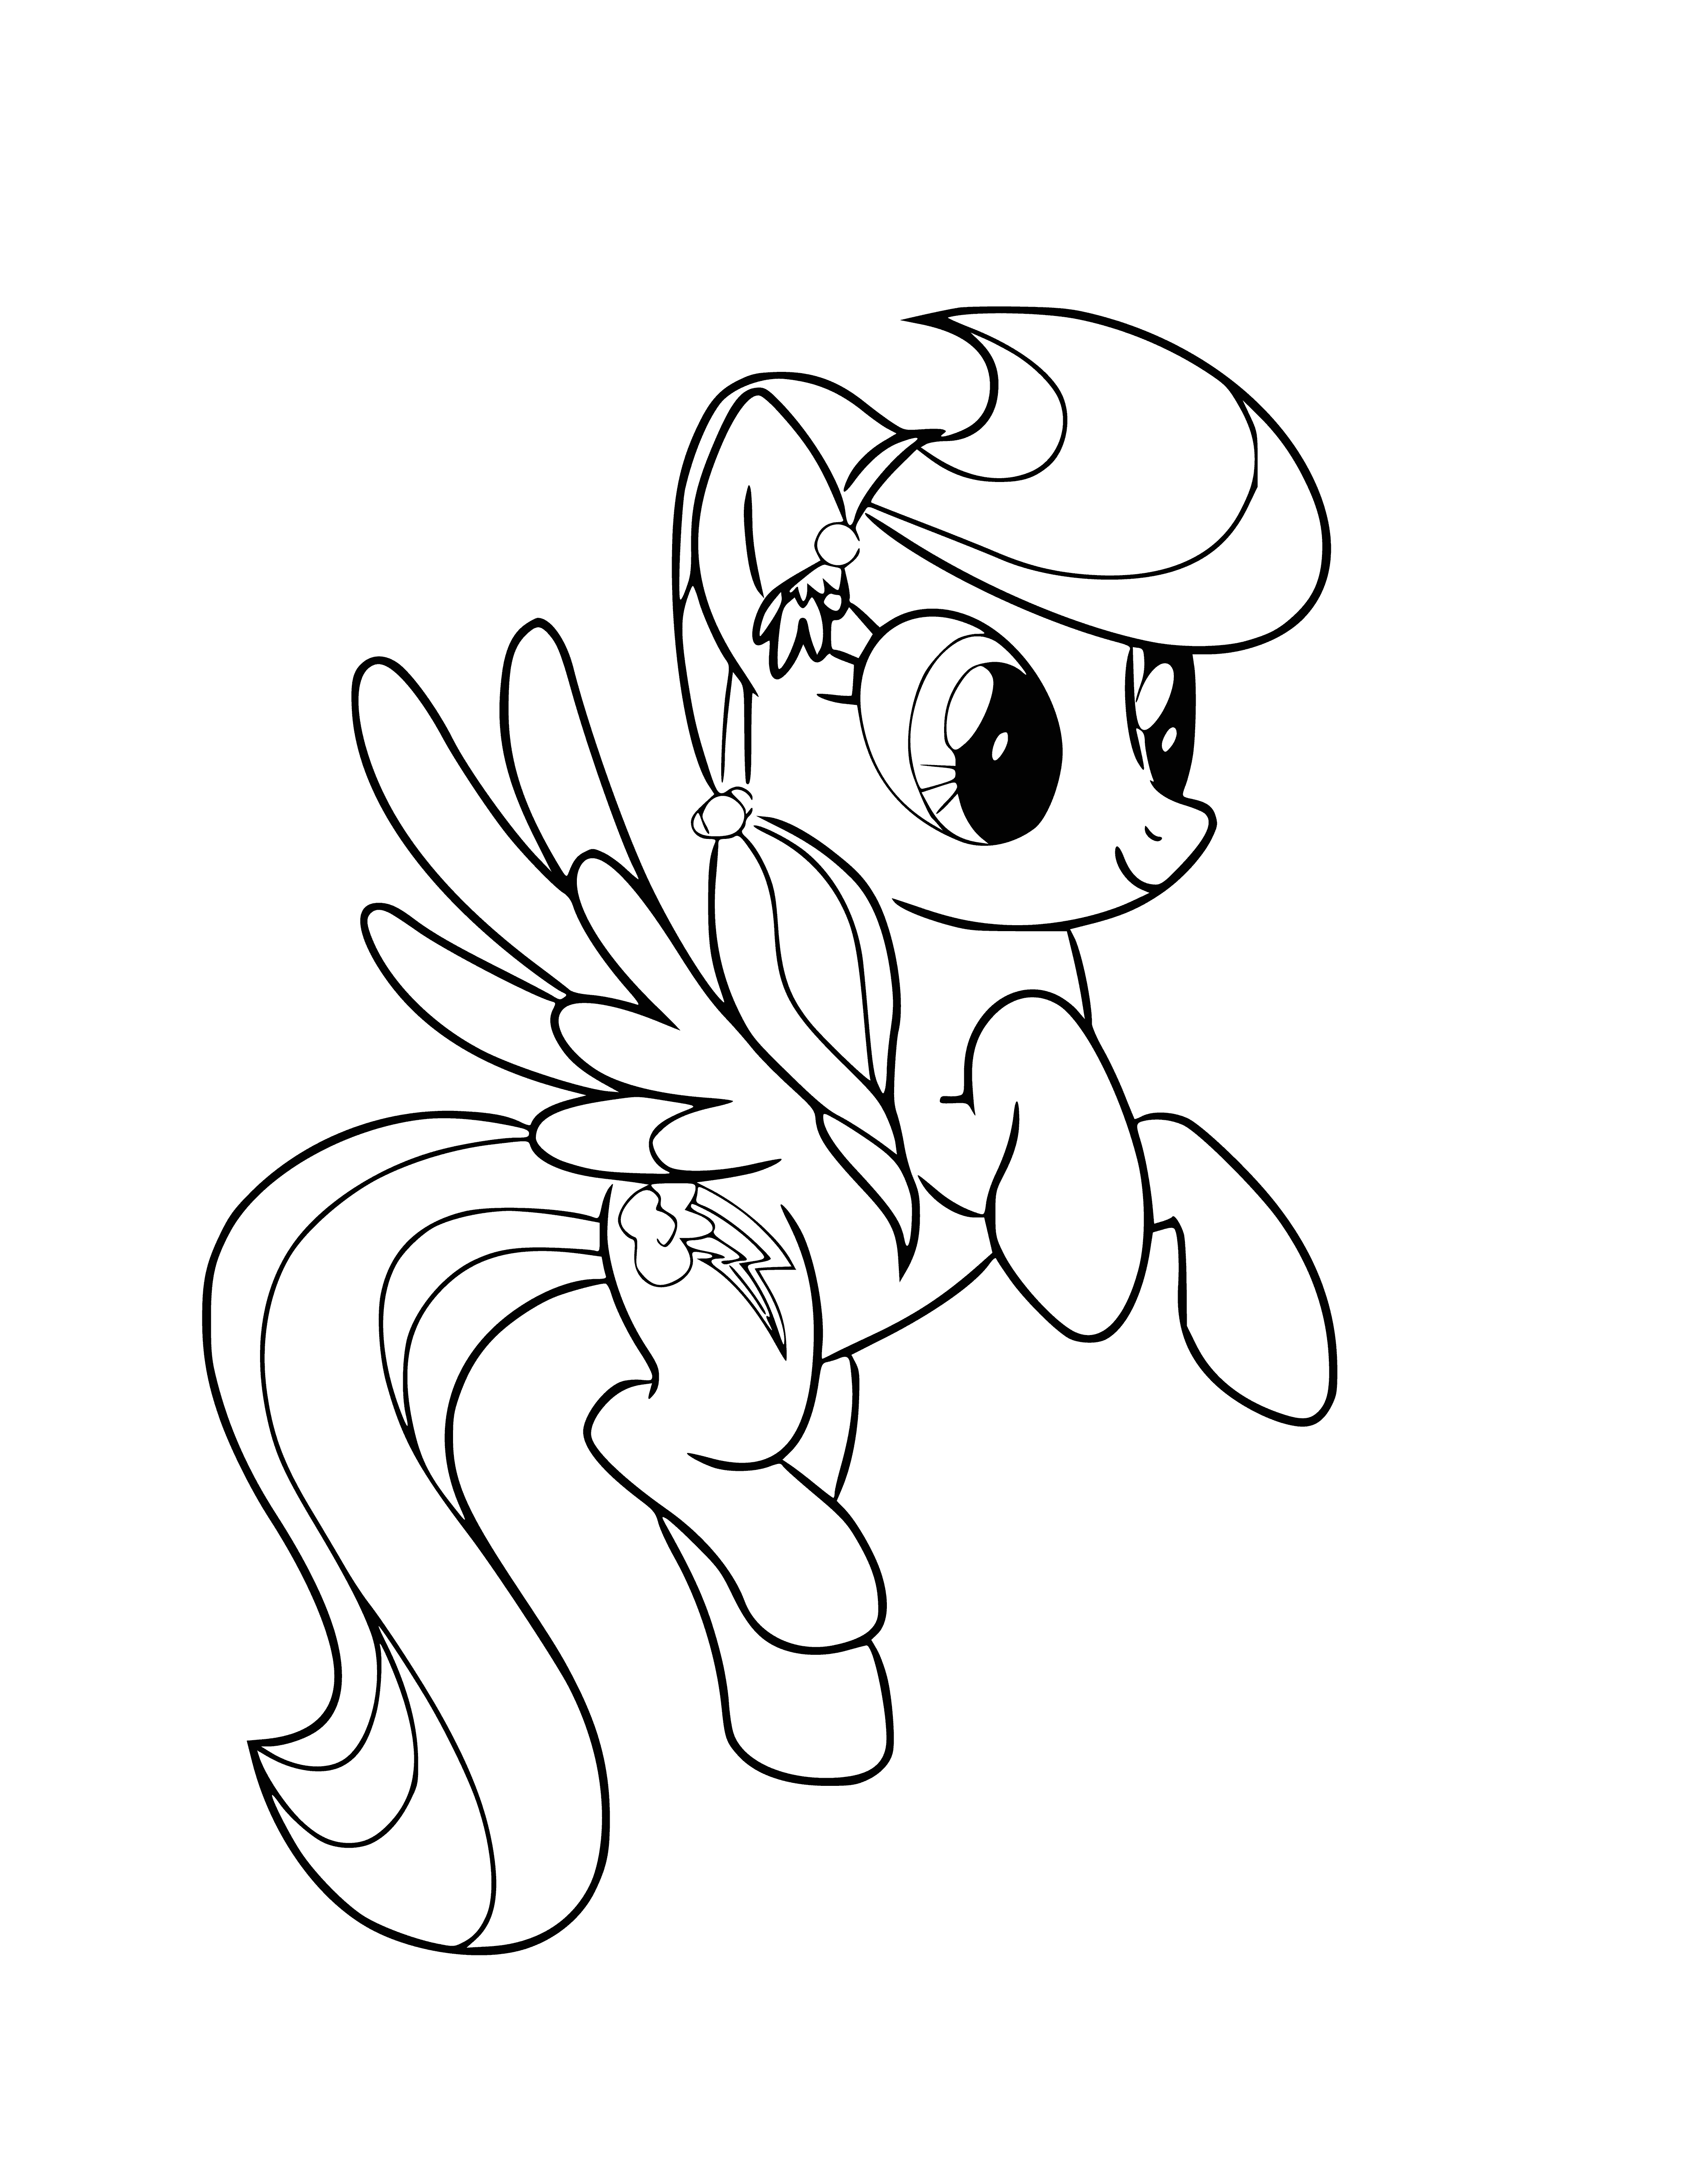 coloring page: Rainbow Dash is a blue pony with a rainbow mane/tail & cutie mark of a rainbow thunderbolt. #MyLittlePony